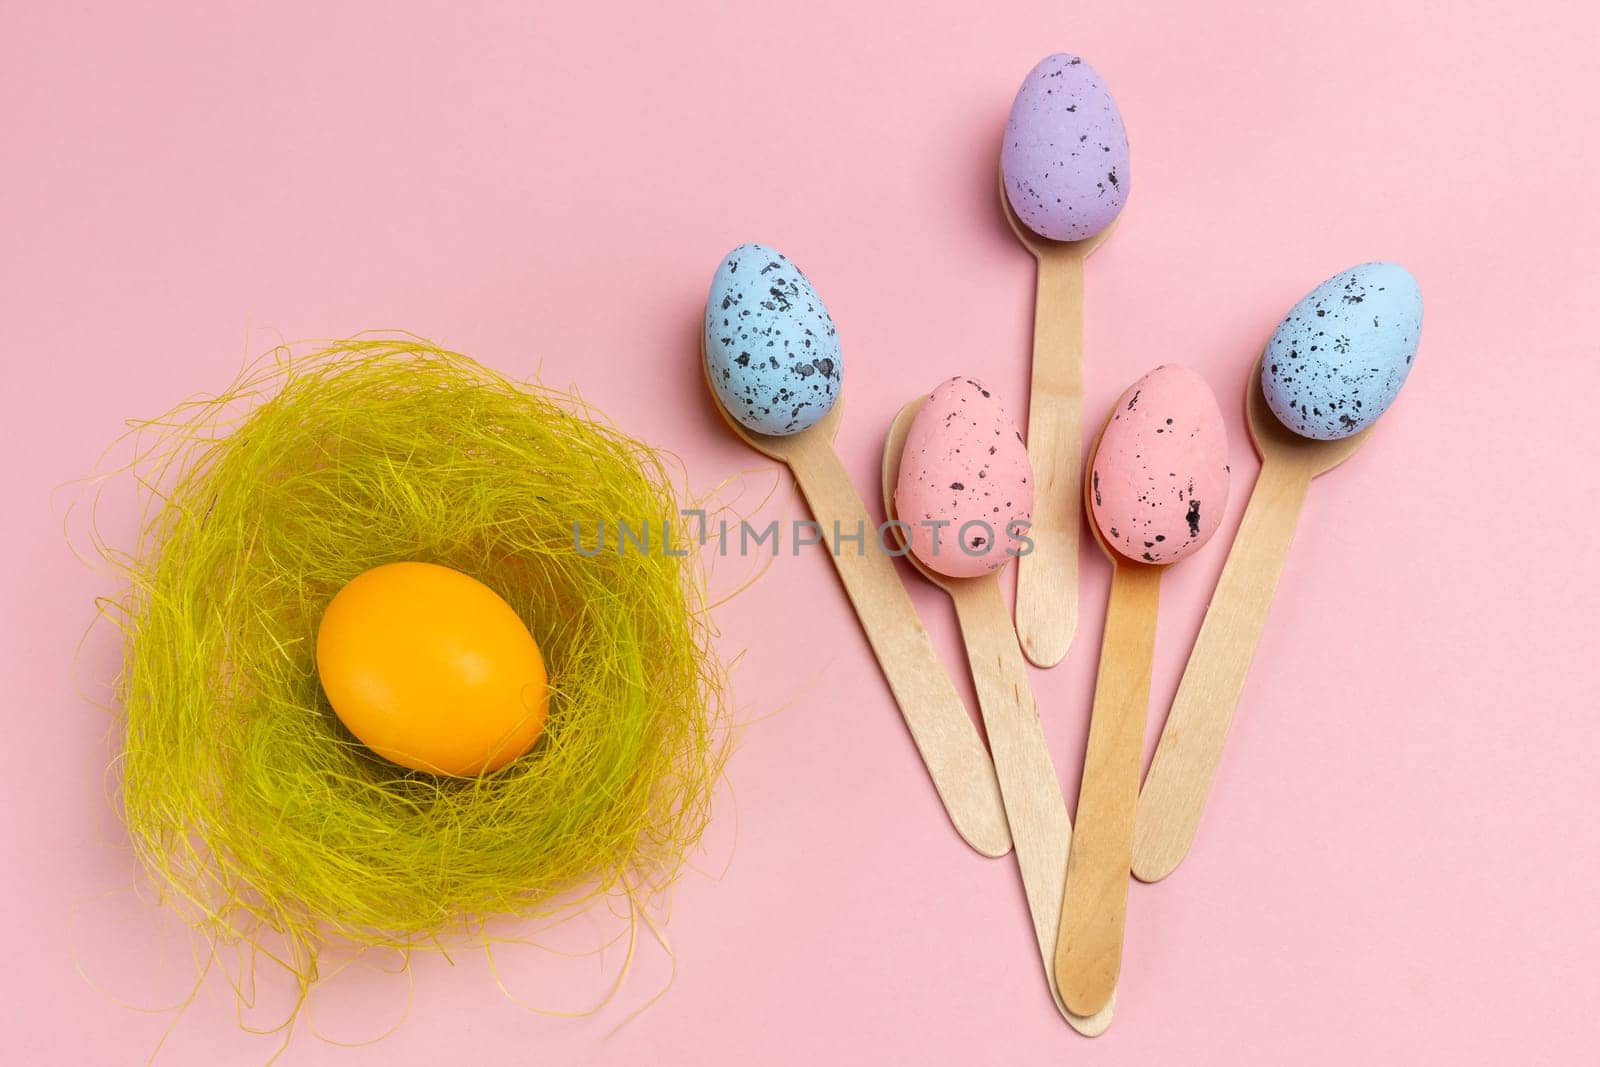 Colored Easter eggs with the nest and the wooden spoons. by mvg6894